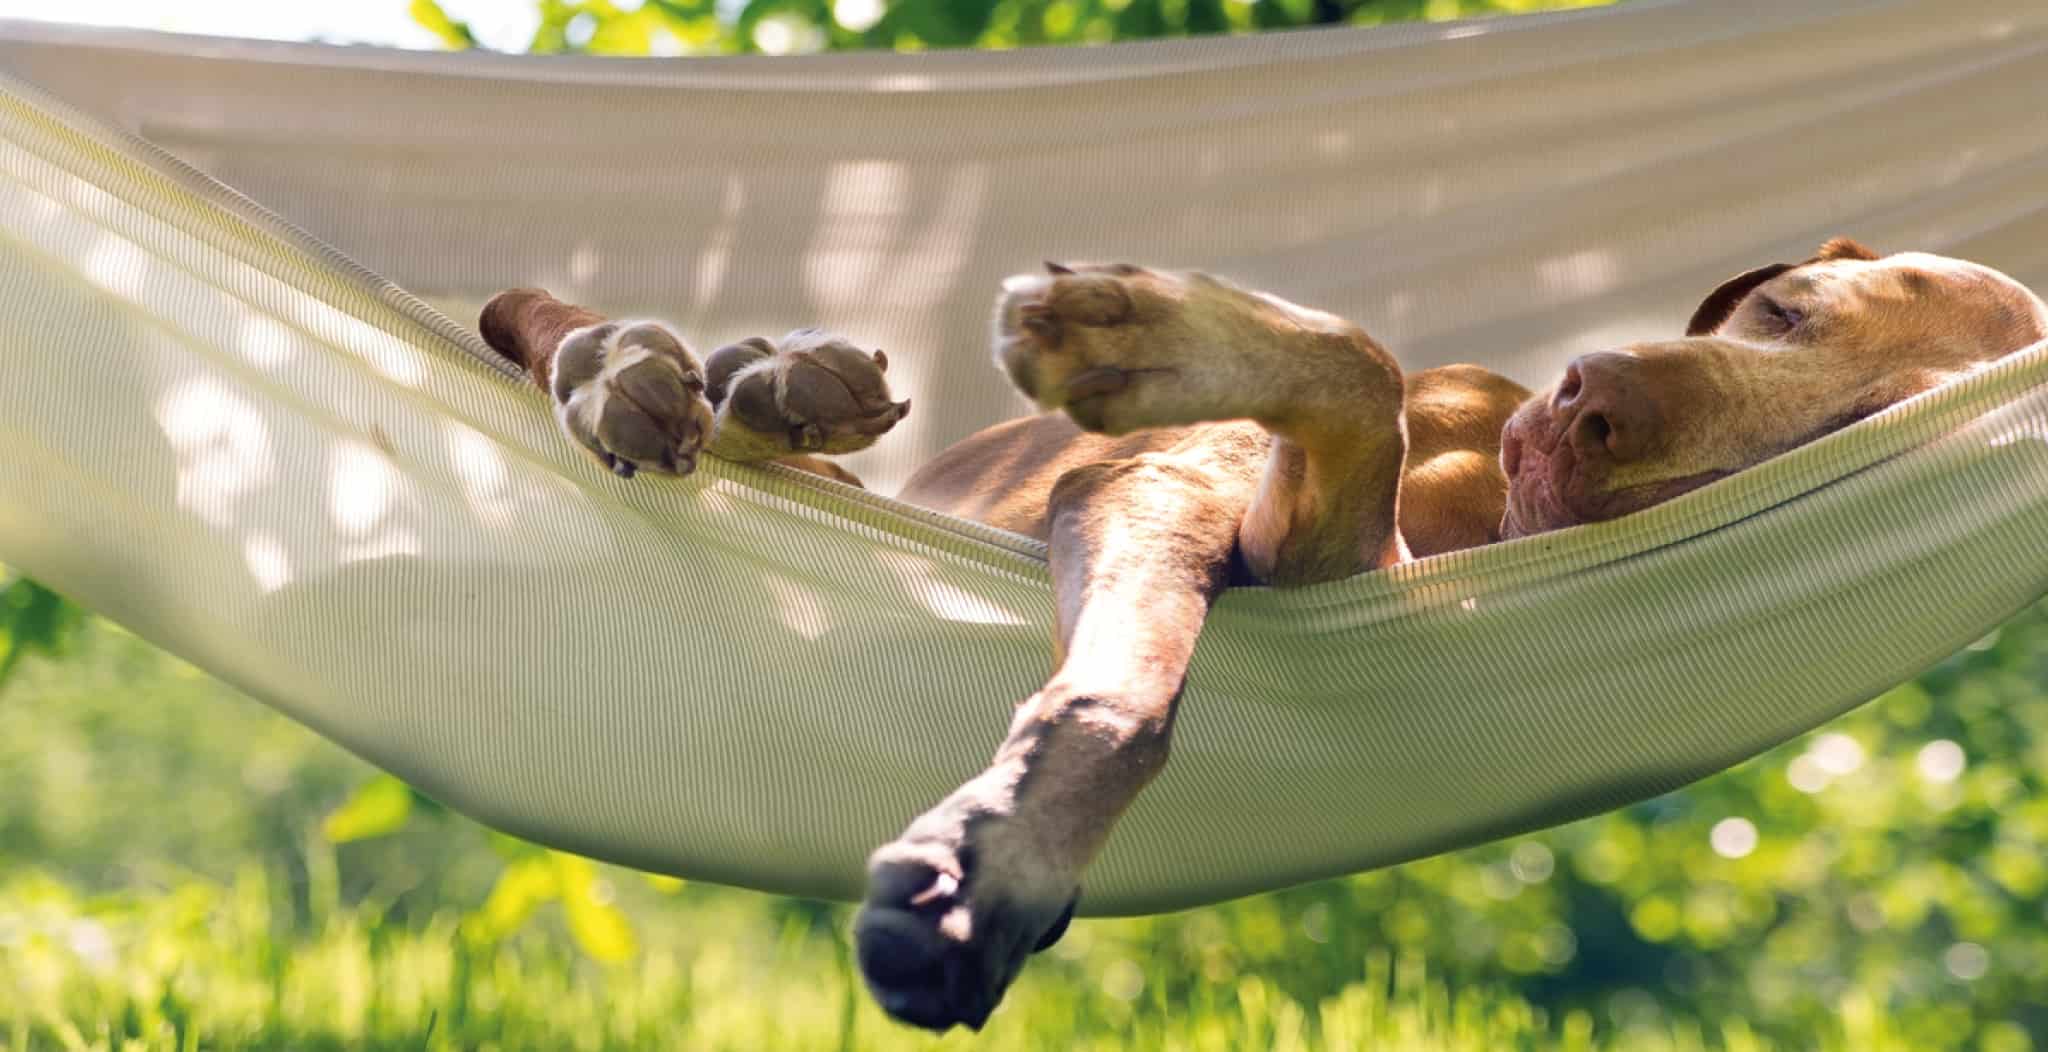 5 Canine Health Issues to Watch Out For in Summer. Keep these tips in mind to minimize the potential of these hazards in the summer months when it is hot out there for your dog. Image of dog in hammock.